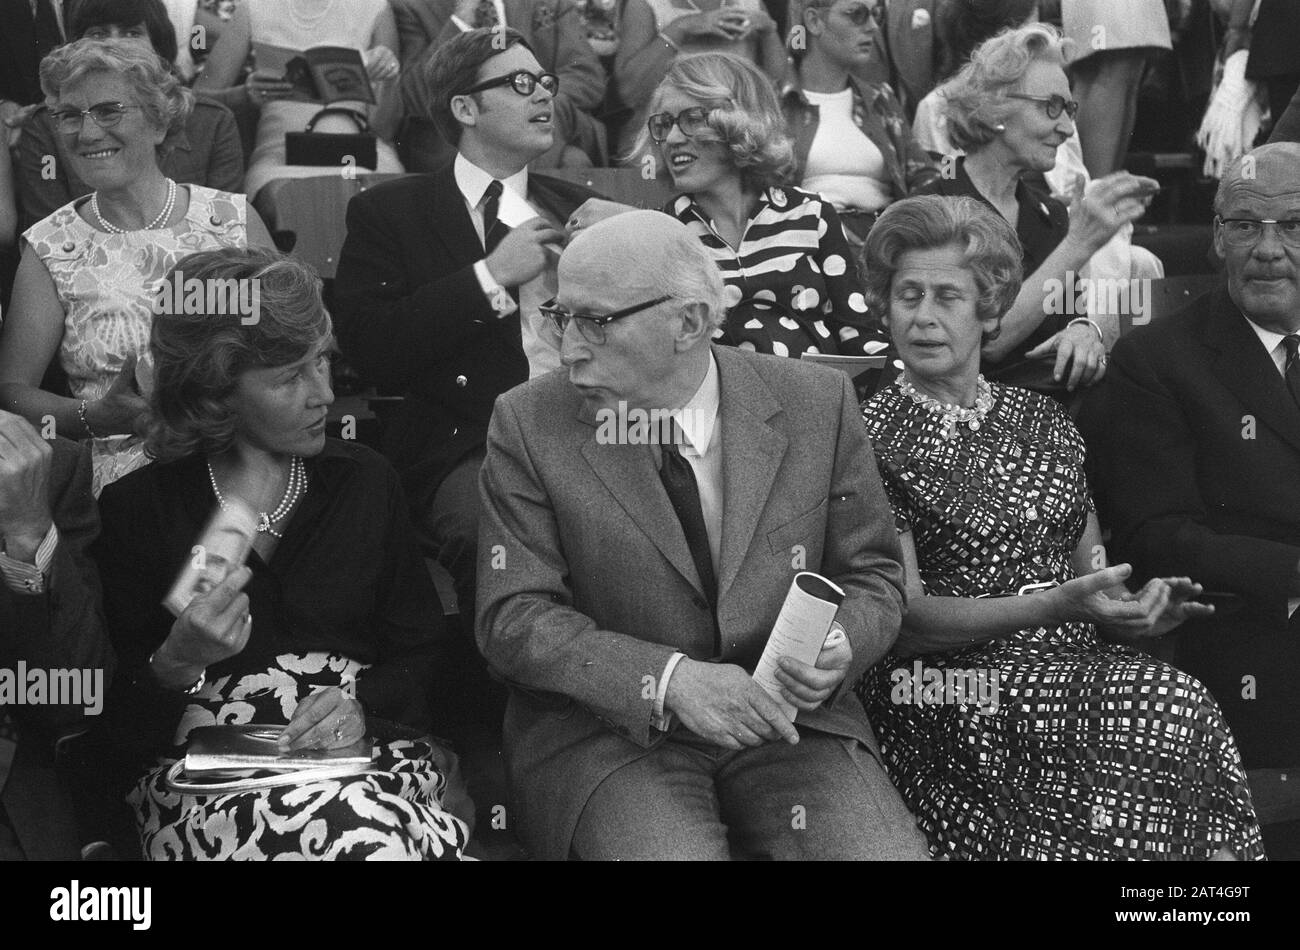 Annual Rai concert by Concertgebouw Orchestra conducted by Bernard Haitink with soprano Anneliese Rothenberger, Mayor Samkalden and wife (right)/Date: 22 June 1973 Keywords: concerts Personal name: Anneliese Rothenberger, Bernard Haitink Concertgebouw Orchestra Stock Photo